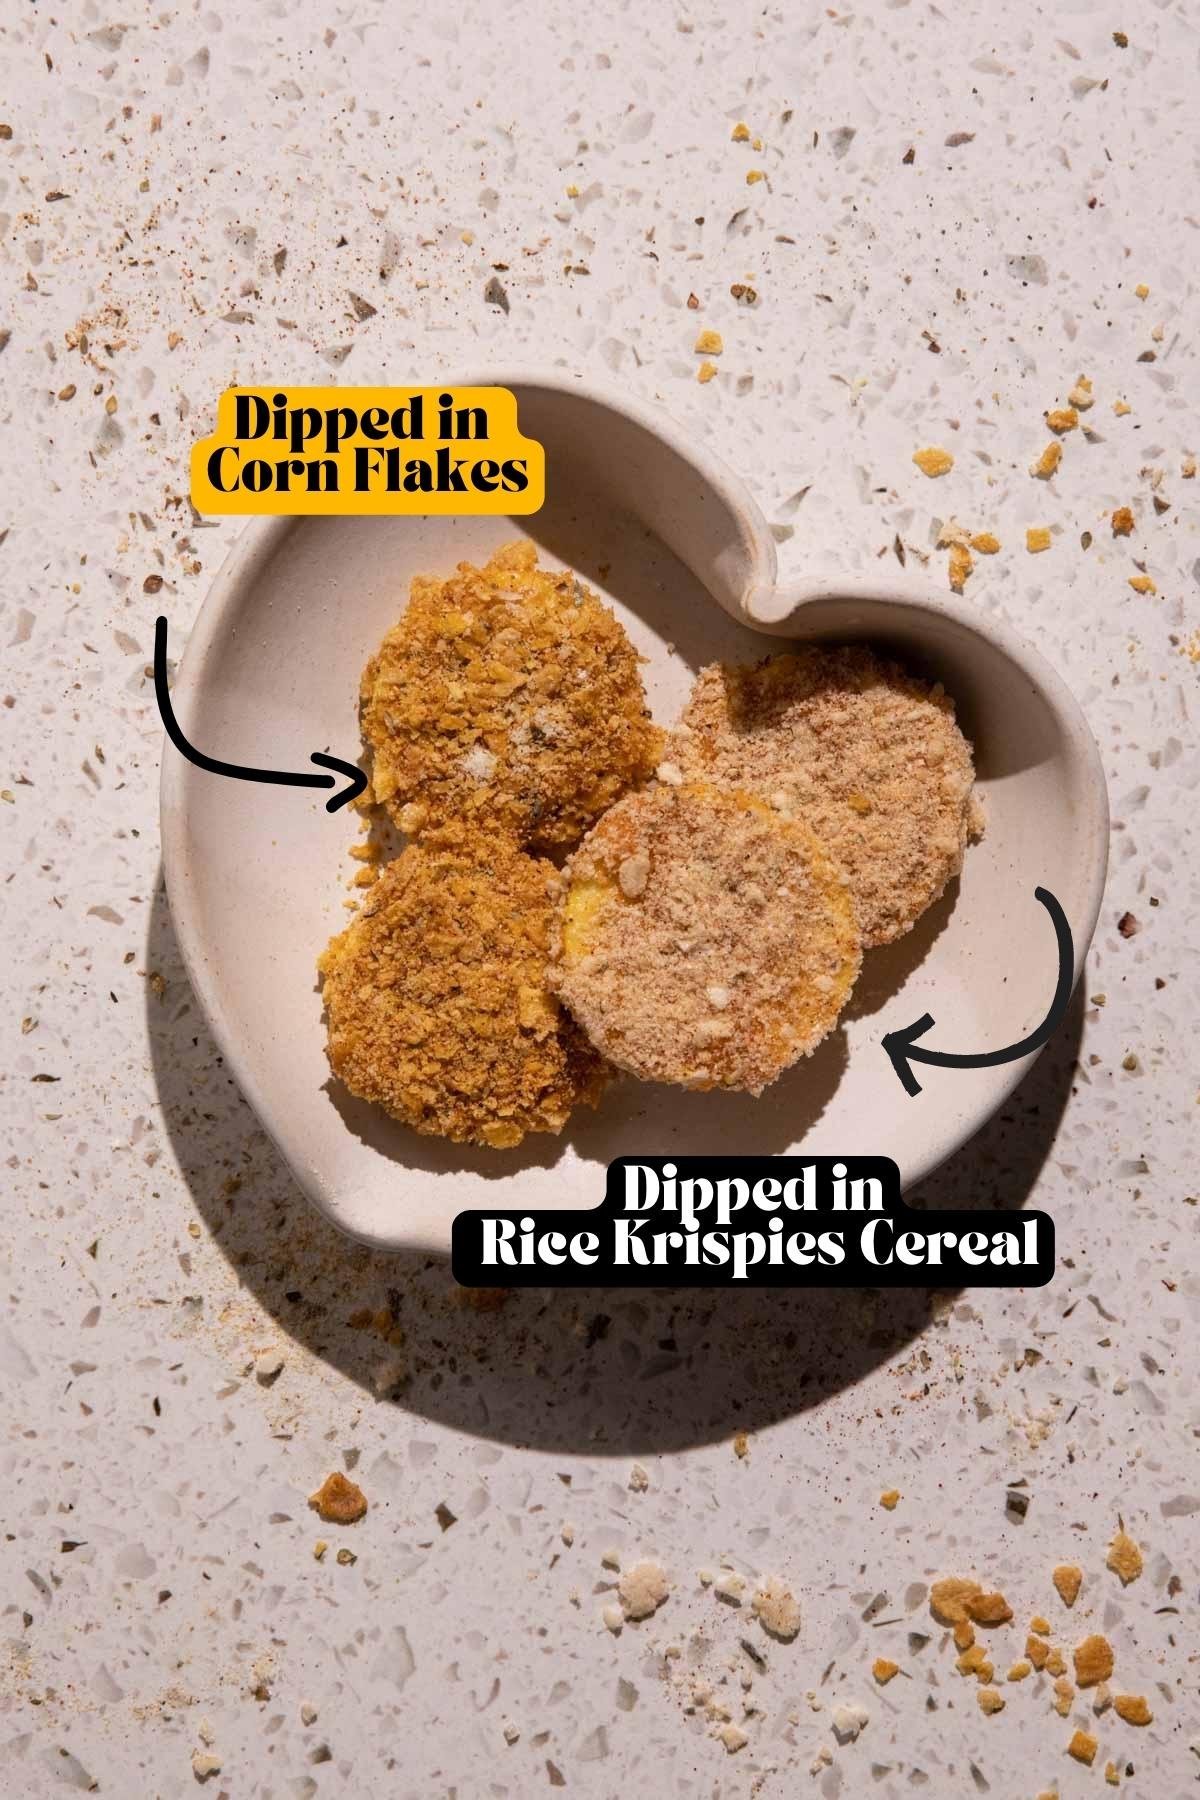 Fried squash dipped in a cereal crust in a heart-shaped bowl